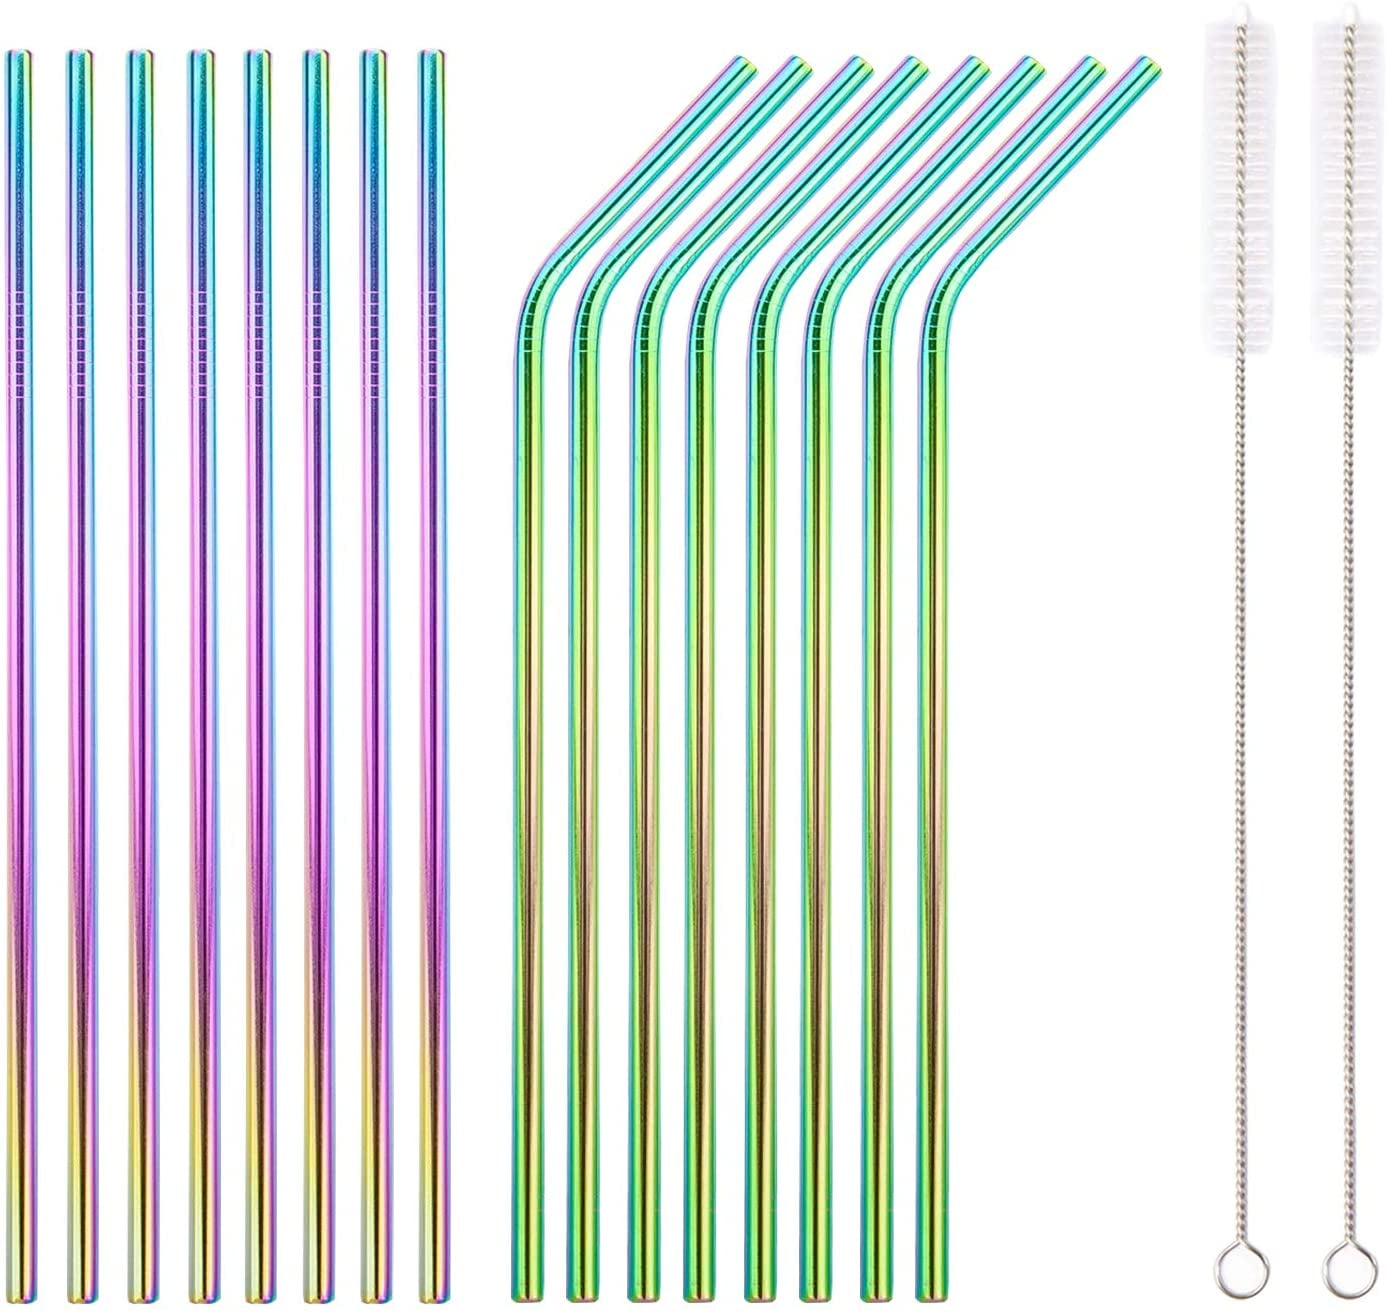 14pc Stainless Steel Drinking Straw Metal Bent Straight Straws Multi-Color Party 